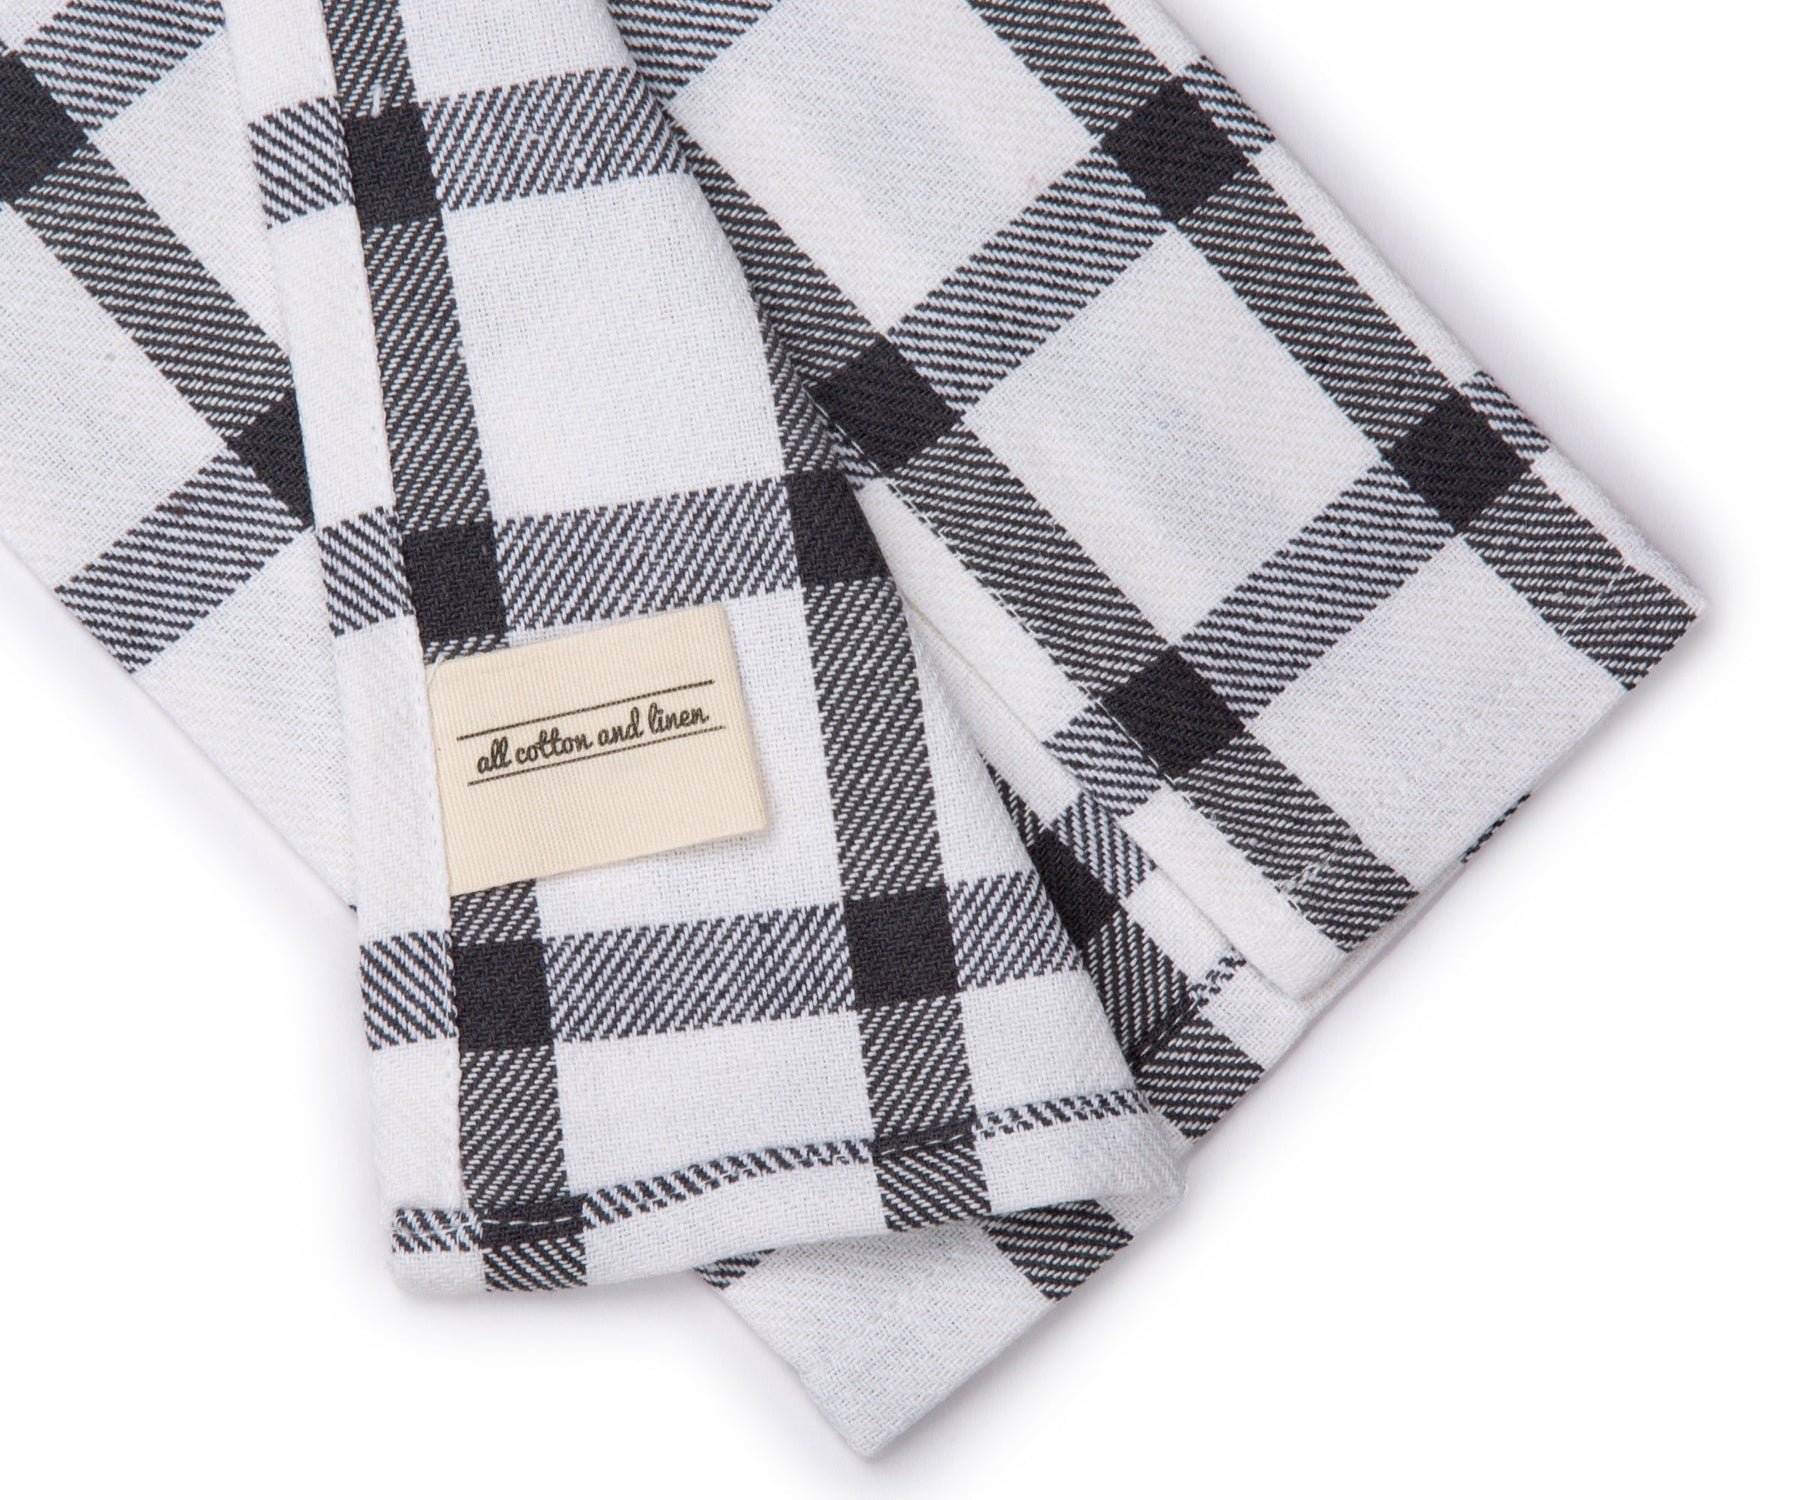 Monochrome checkered dish towel with visible brand label